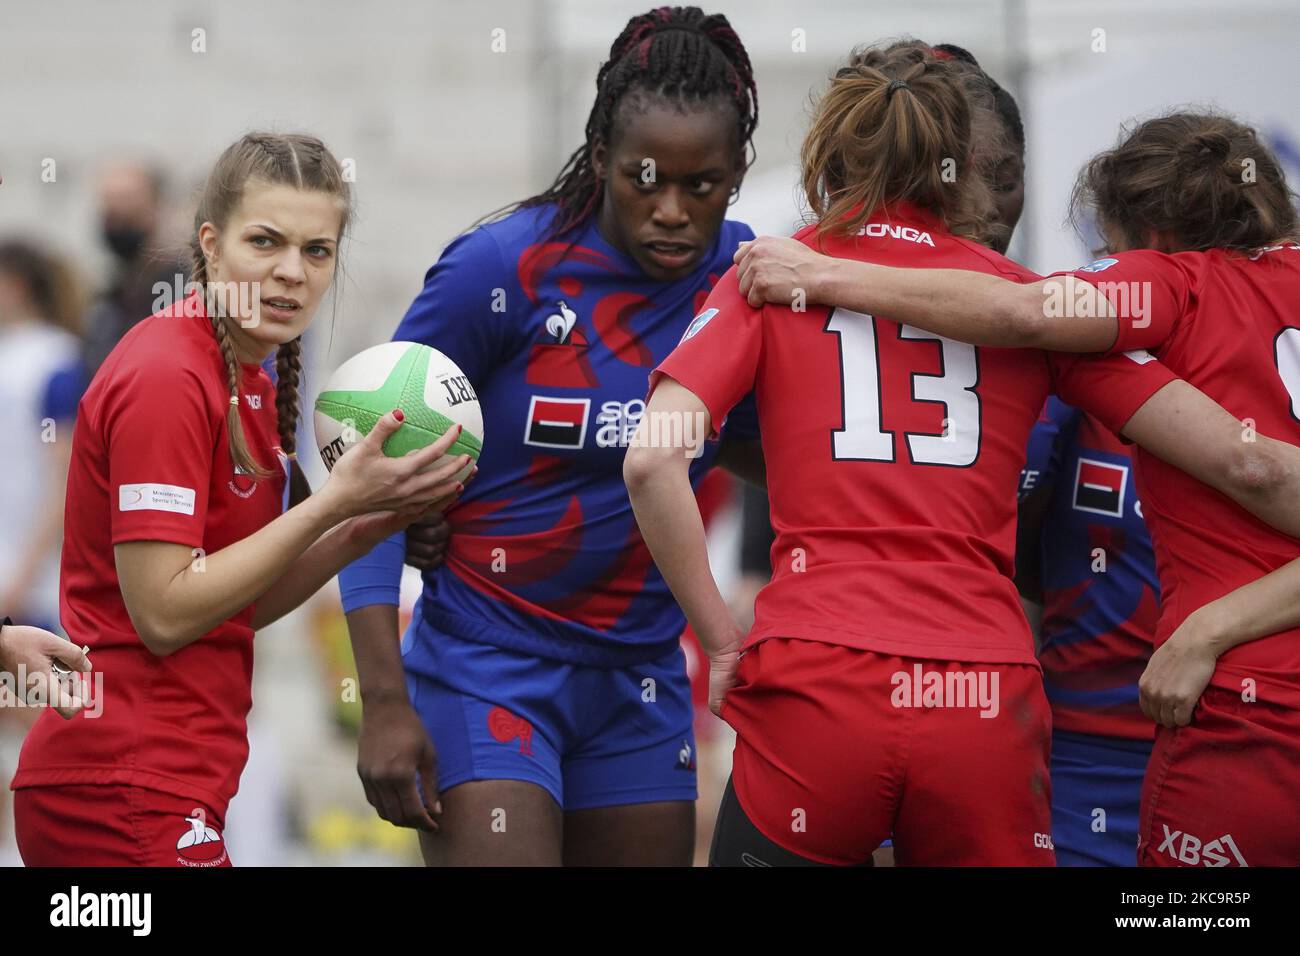 player of Poland during match 20 between Poland and France during Day Two of The Madrid Rugby Sevens International Tournament at Universidad Complutense de Madrid on February 21, 2021 in Madrid, (Photo by Oscar Gonzalez/NurPhoto) Stock Photo